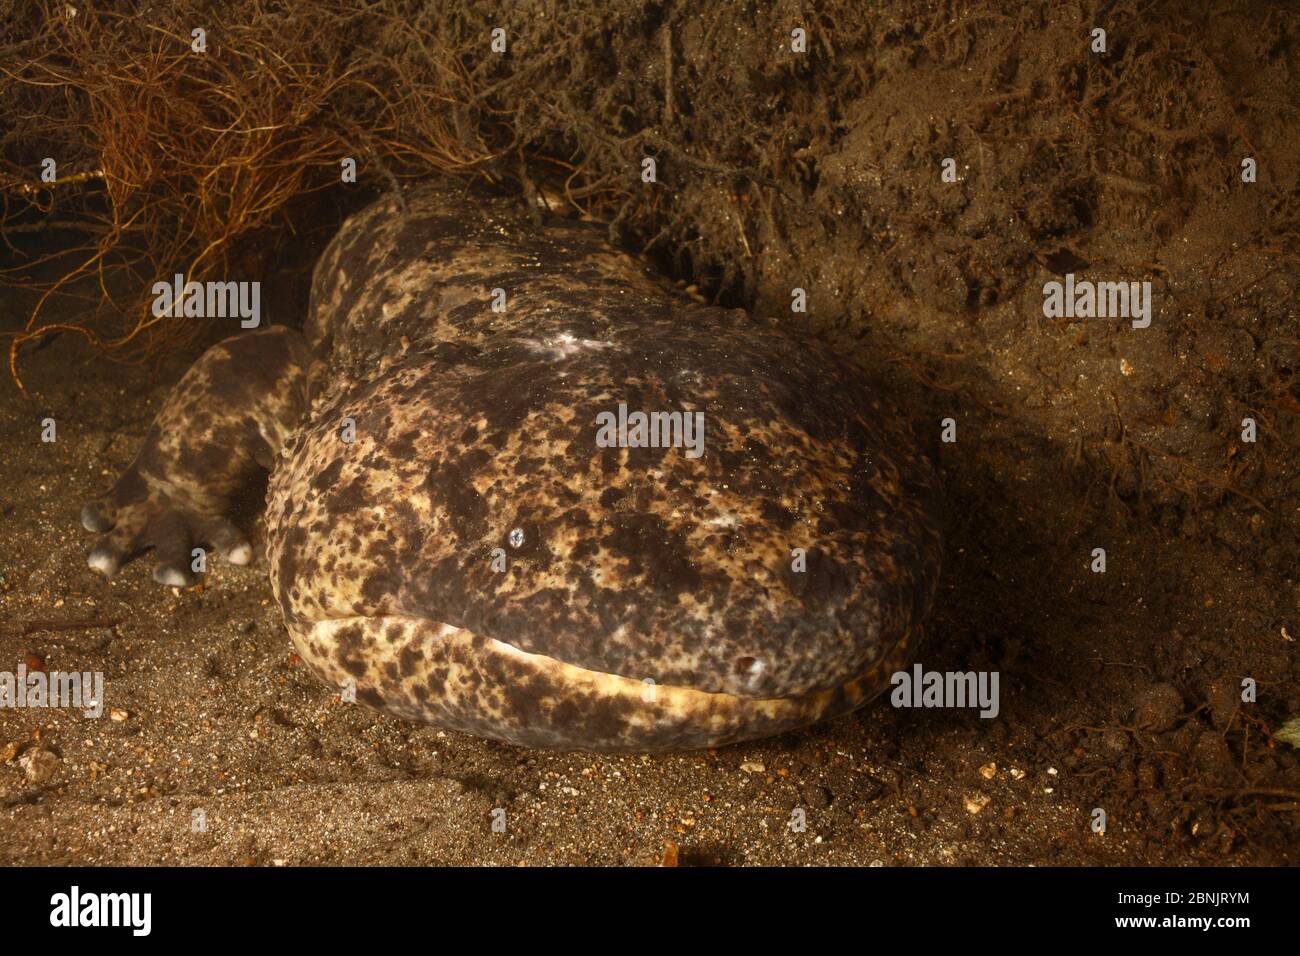 Japanese giant salamander (Andrias japonicus) den master guarding the nest with the eggs, Honshu, Japan. September. Stock Photo